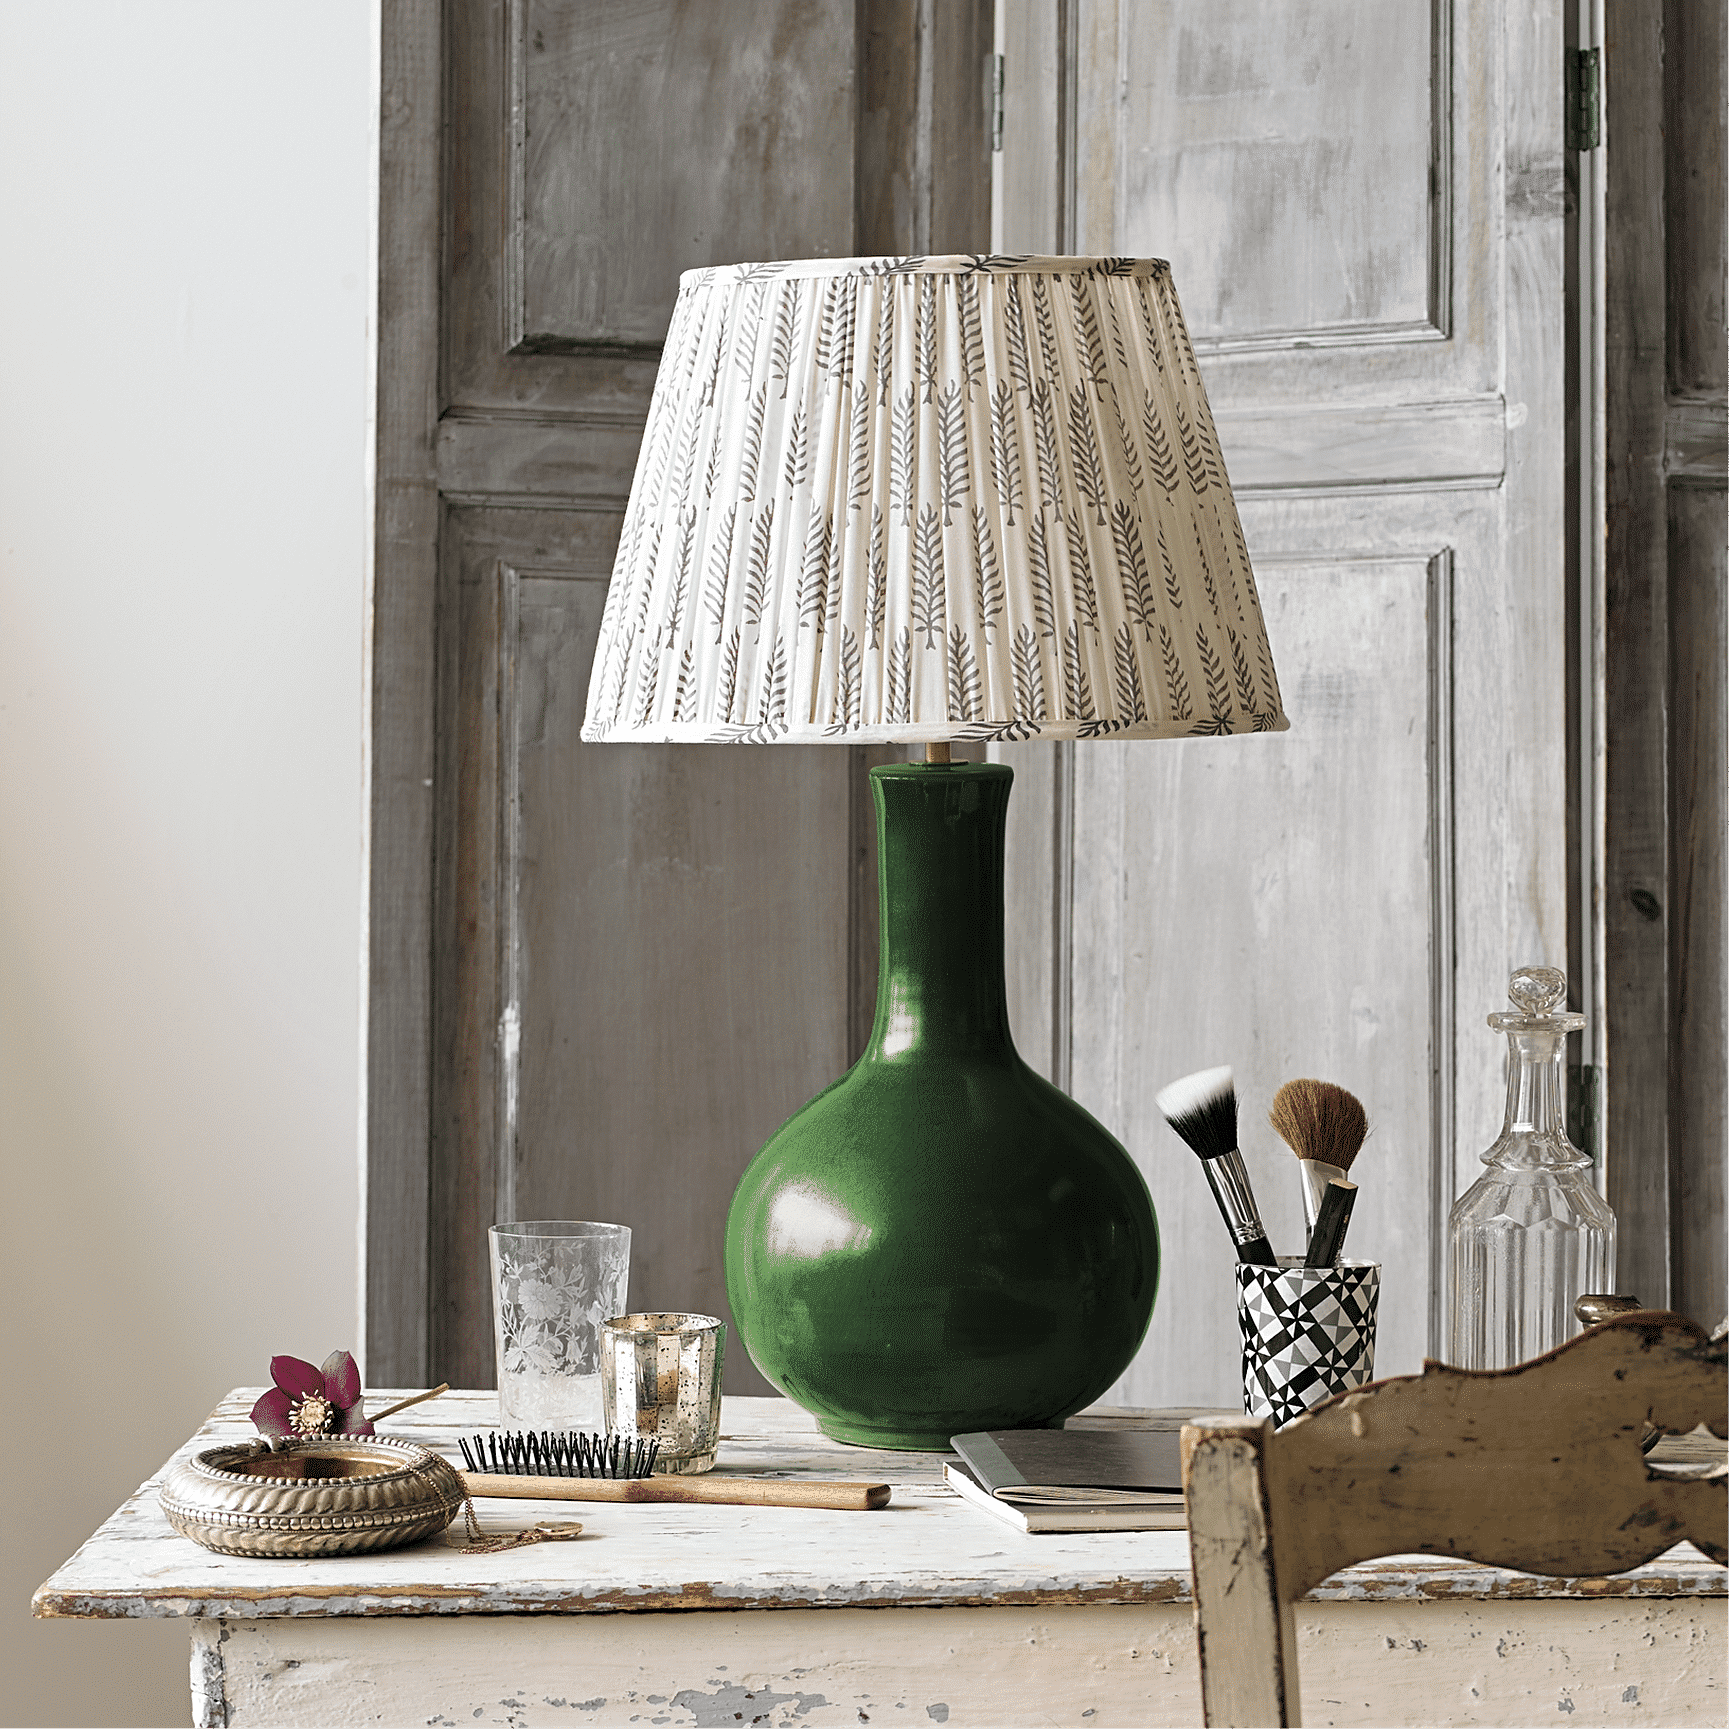 Pooky Nellie table lamp in a green glaze